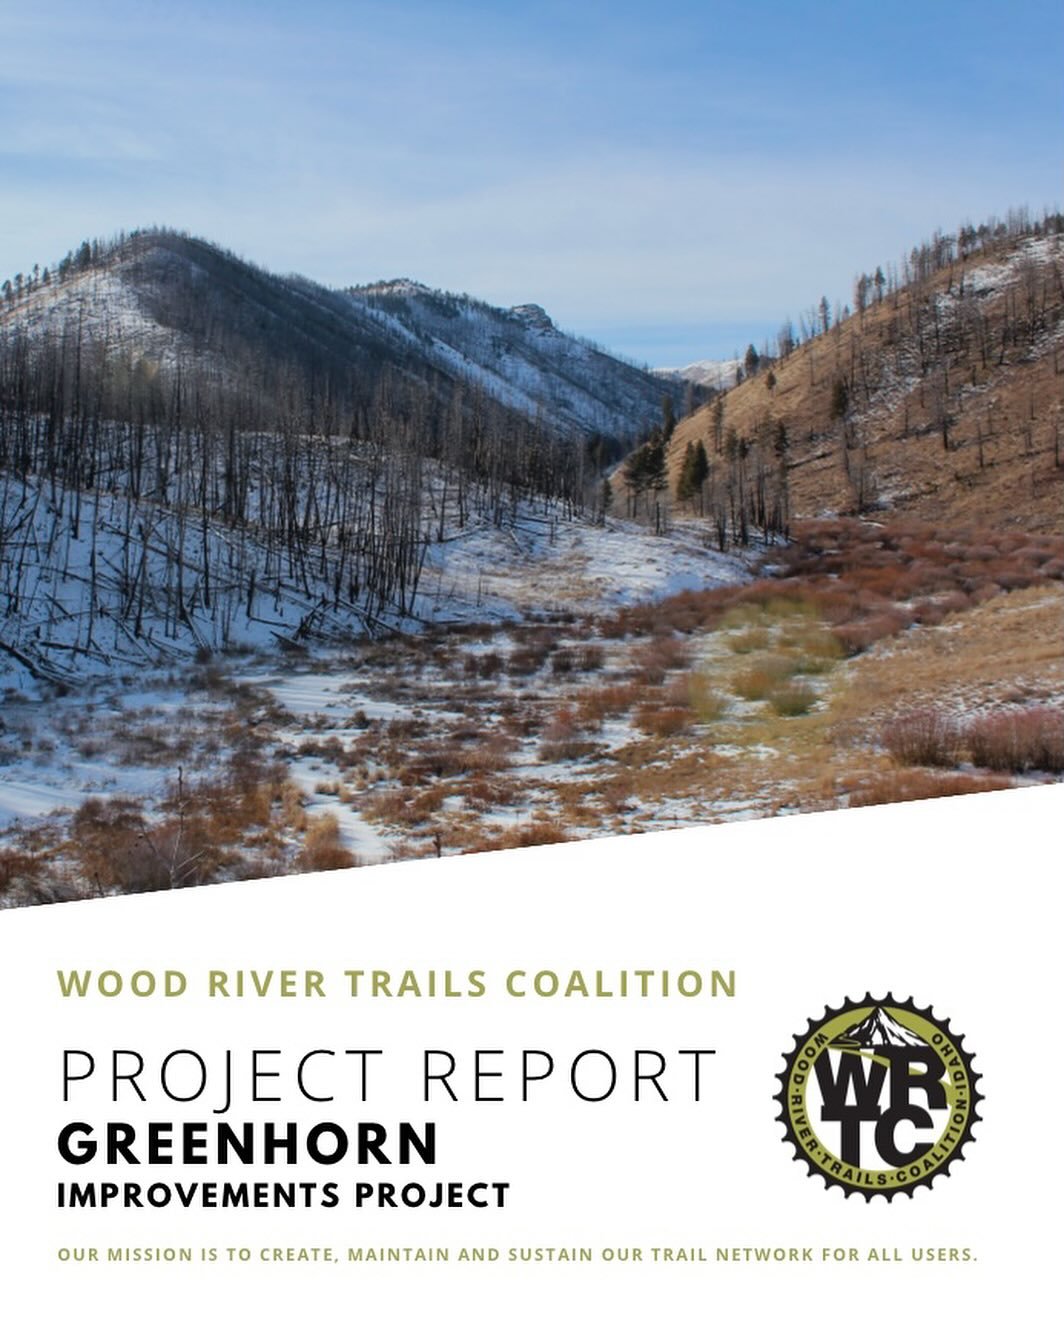 We are so excited to present to the community the Greenhorn Improvements Project. In collaboration with the U.S. Forest Service - Sawtooth National Forest - Ketchum Ranger District, we are bringing some much needed restoration and trail realignment t